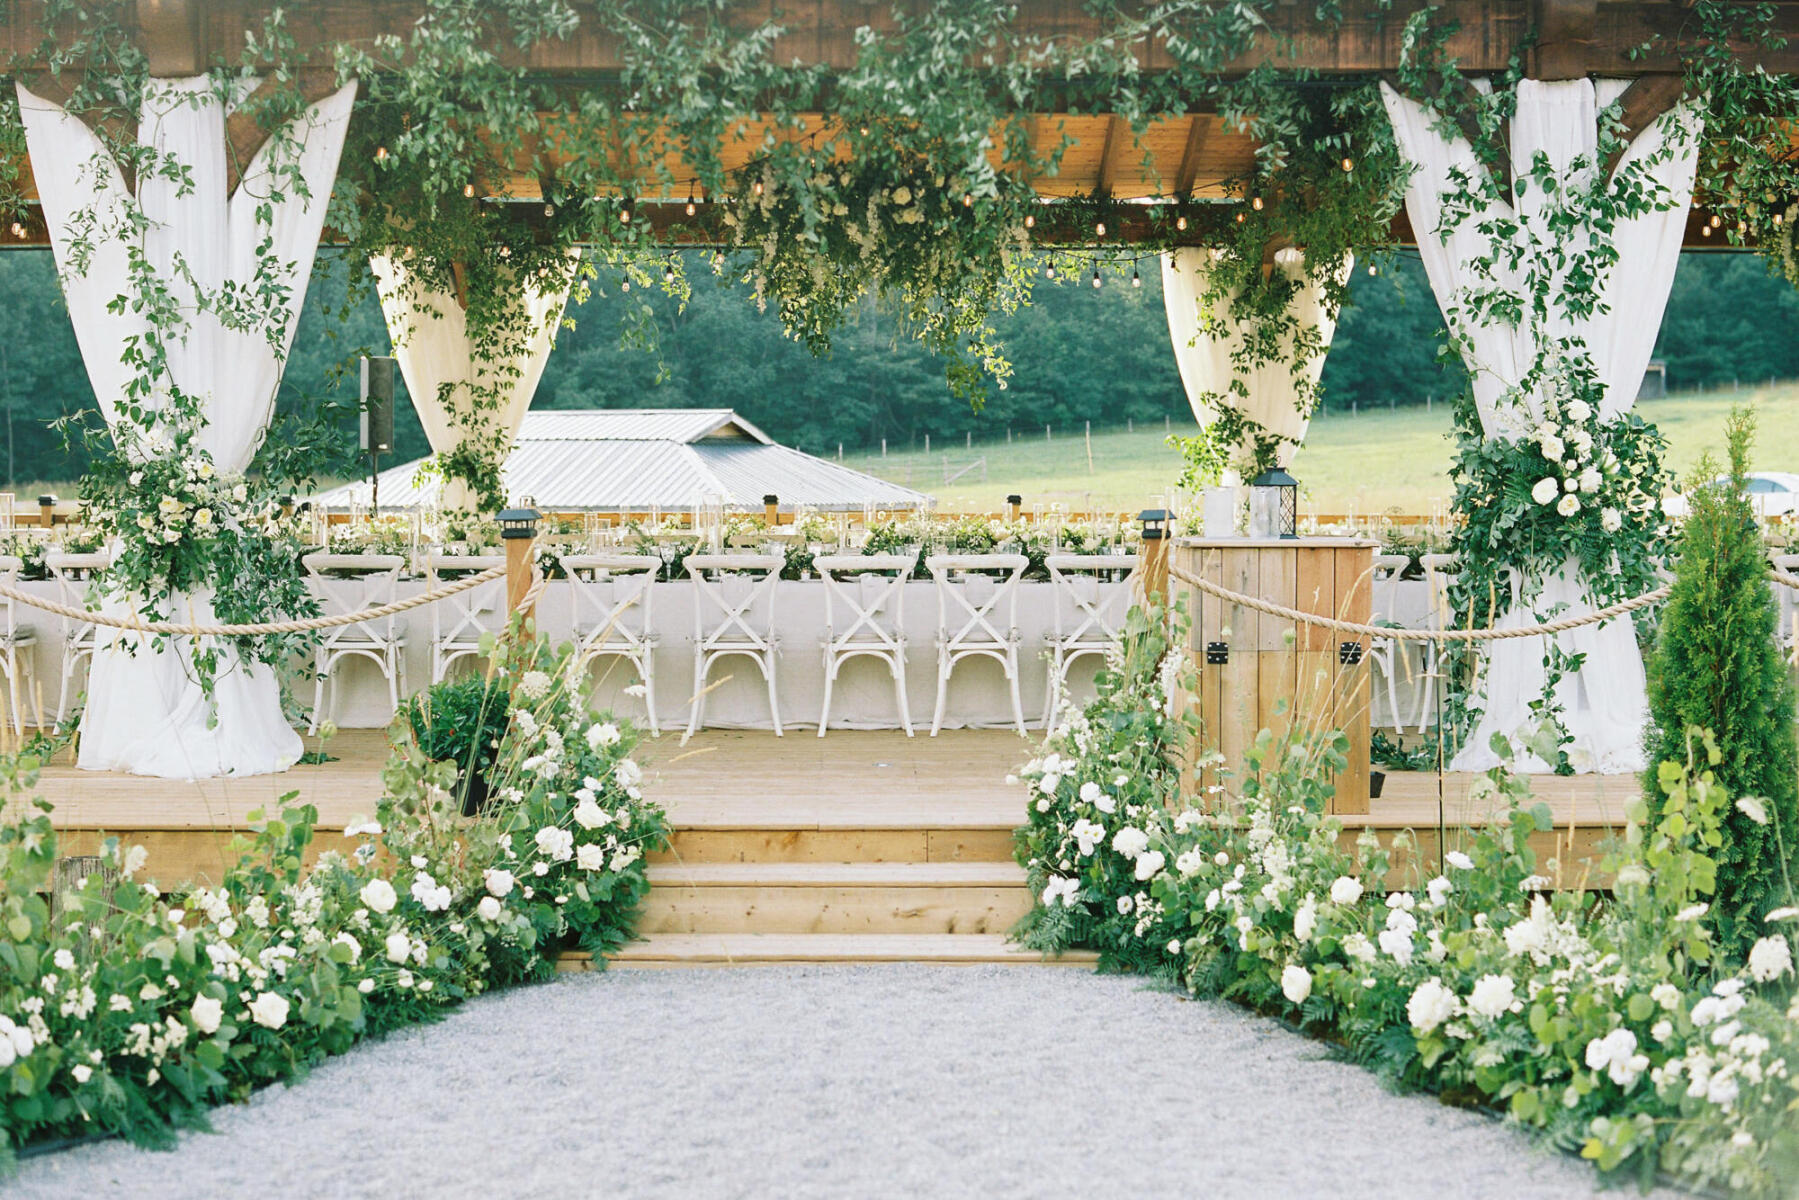 A flower-lined pathway to an outdoor wedding reception on a deck decorated with hanging greenery, drawpery, and linen-covered tables.